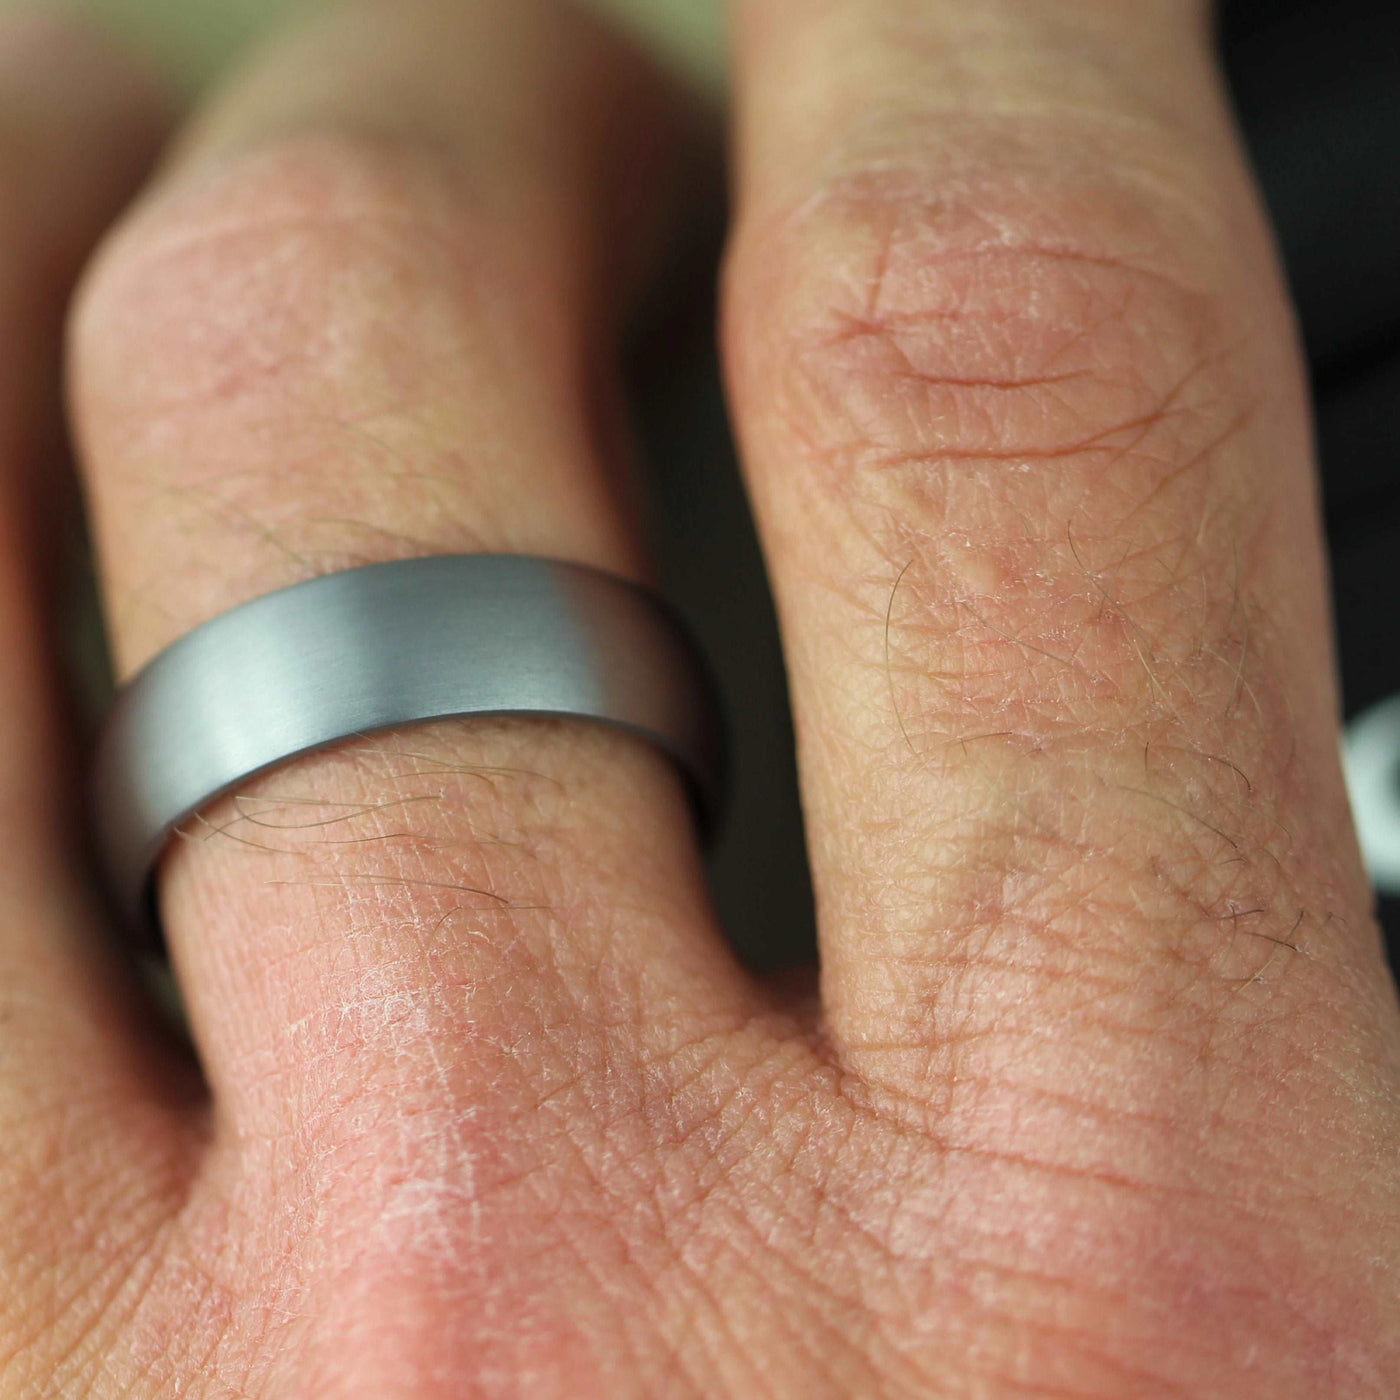 Mans tantalum wedding band. 7mm wide in a matt/satin finish and comfort fit